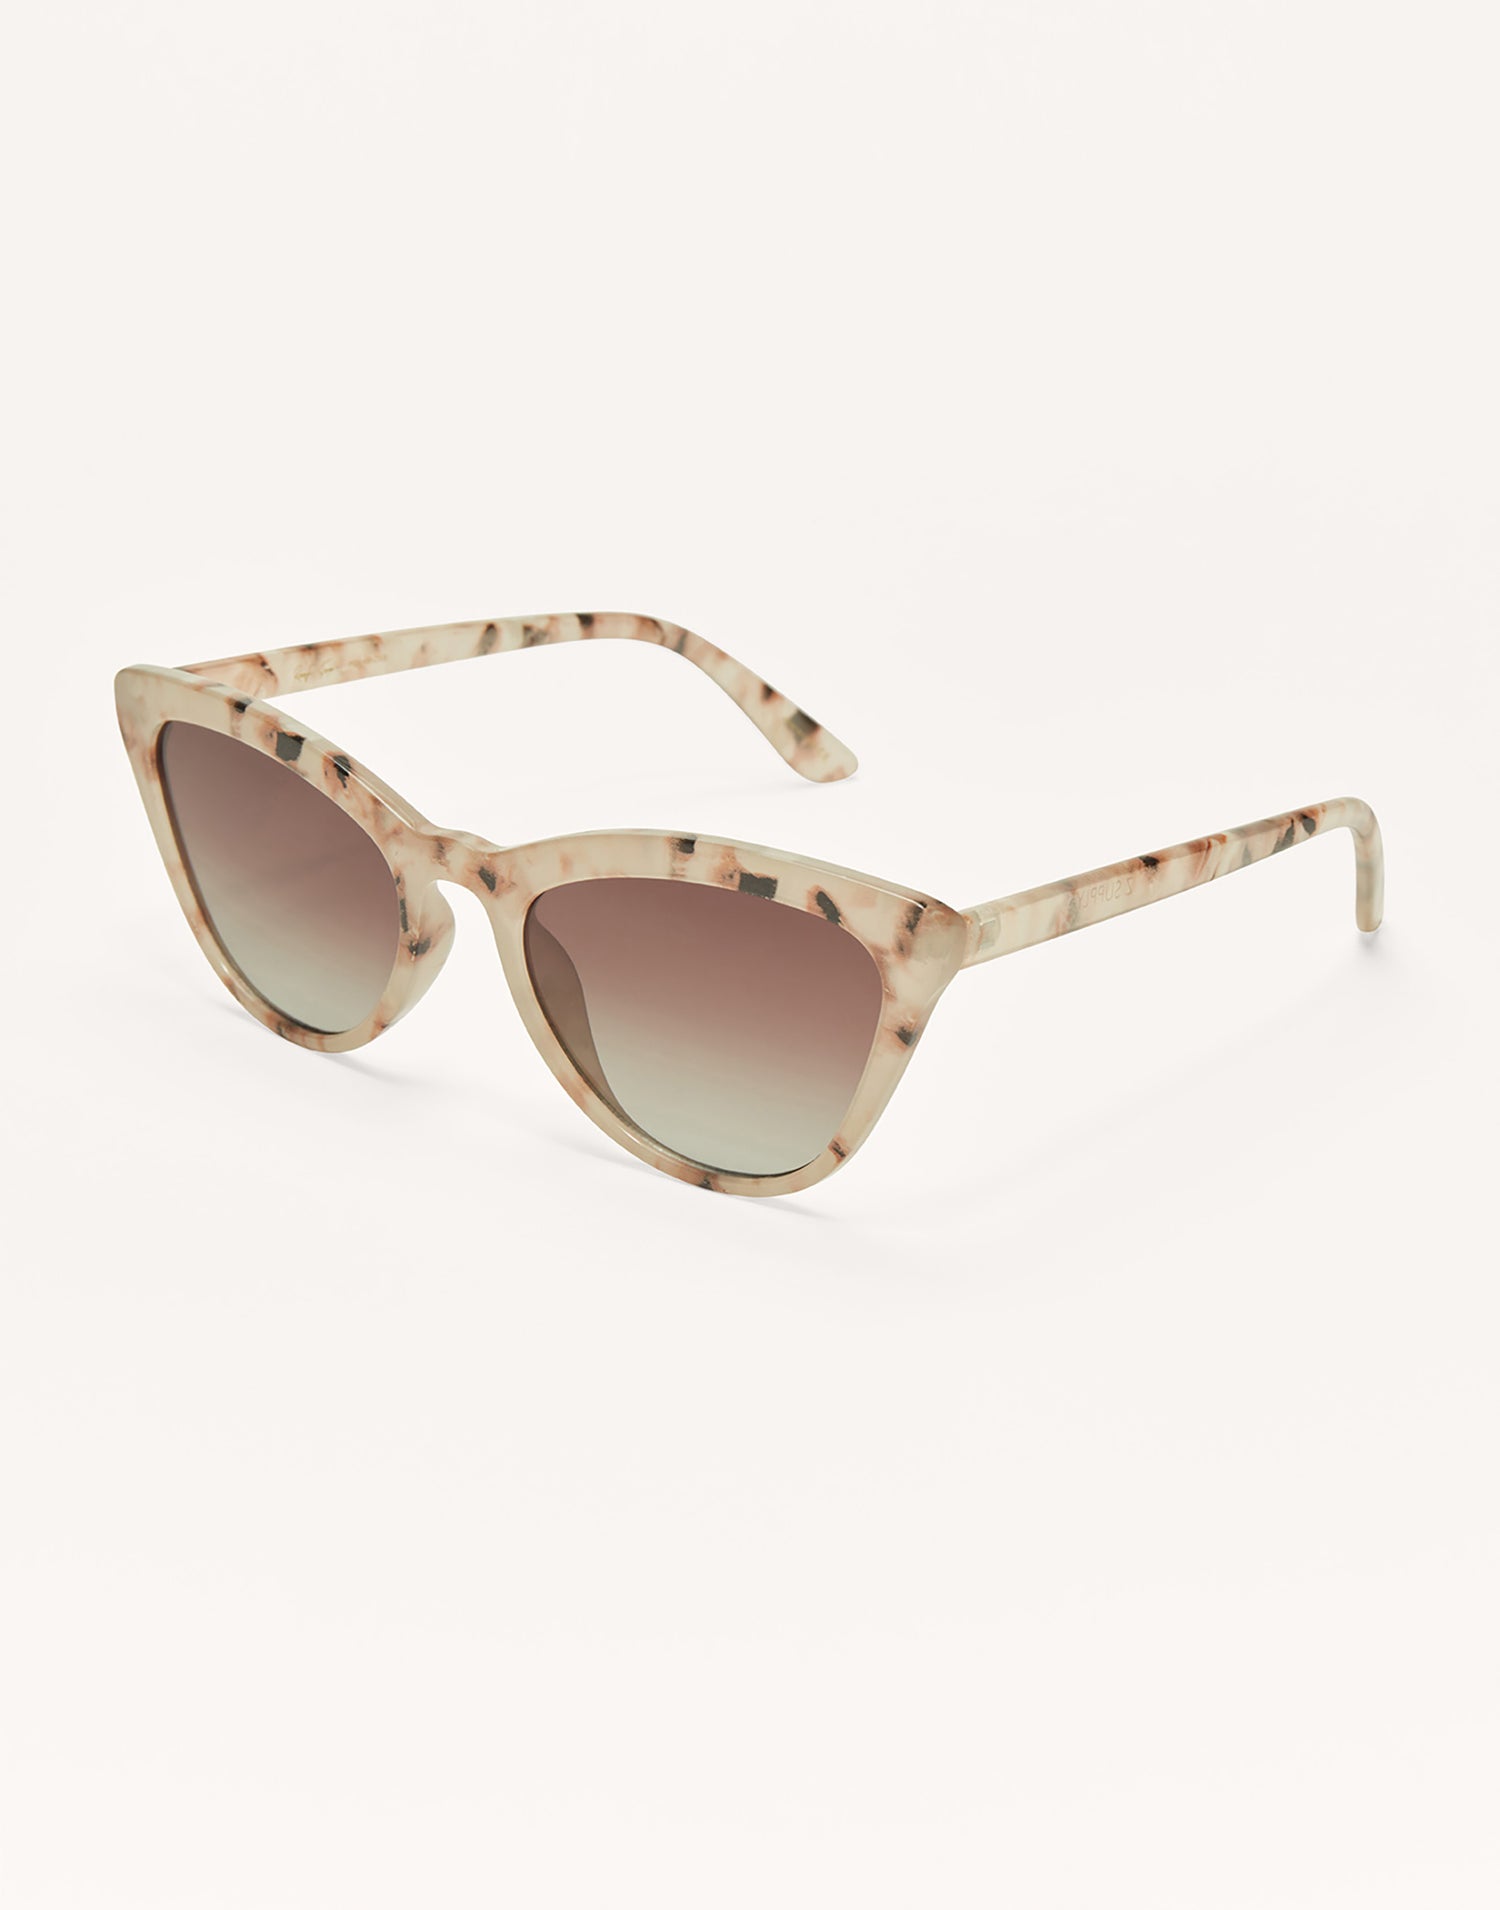 Rooftop Sunglasses by Z Supply in Warm Sands - Angled View